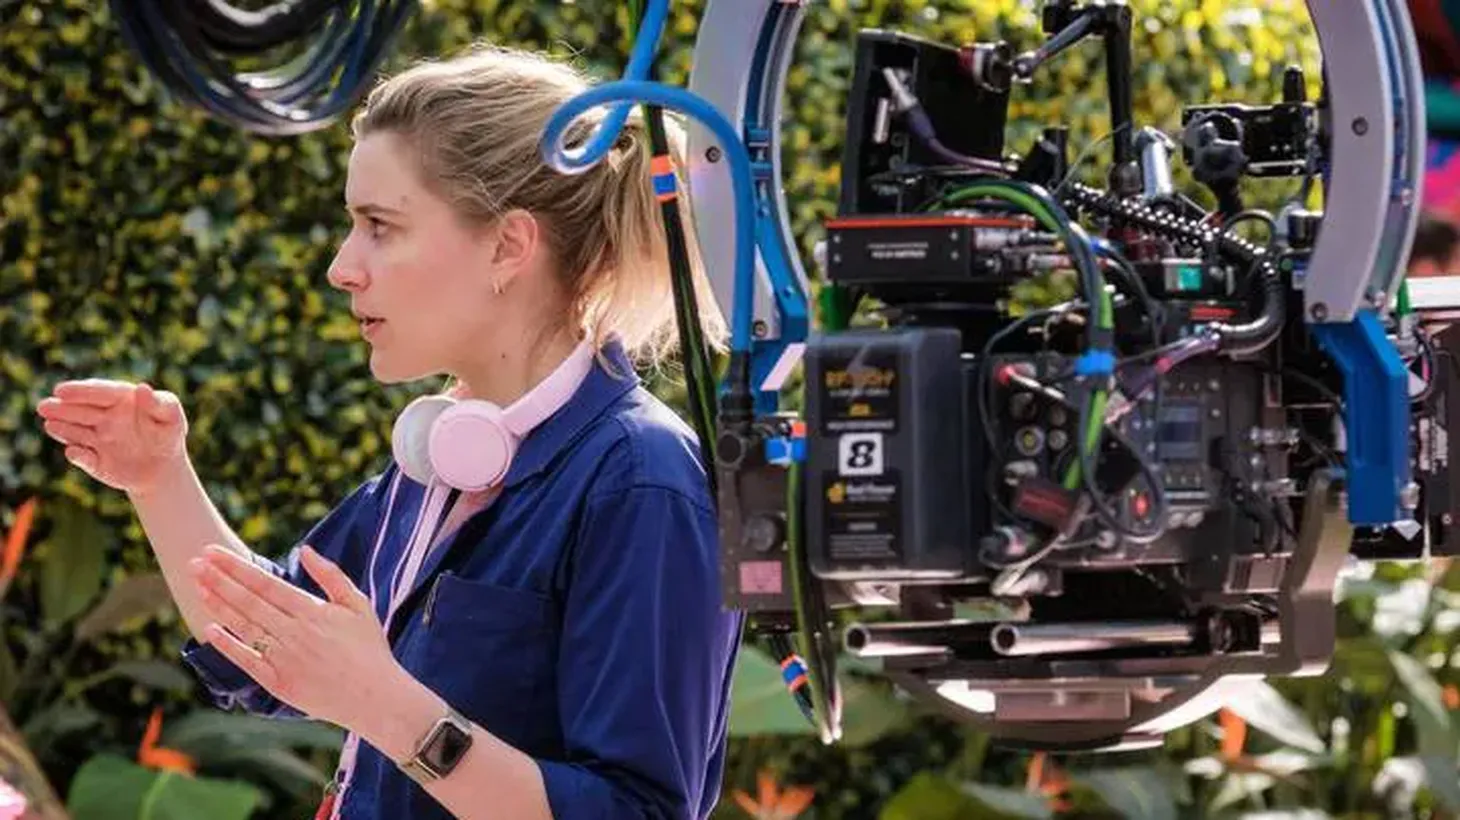 “When I heard [The Rise and Fall of Ziggy Stardust and the Spiders from Mars] album, I felt like it was made just for me. I felt like I was an alien. I felt like I was a man from Mars,” says writer/director Greta Gerwig. Pictured on the set of Warner Bros. Pictures’ “Barbie.”